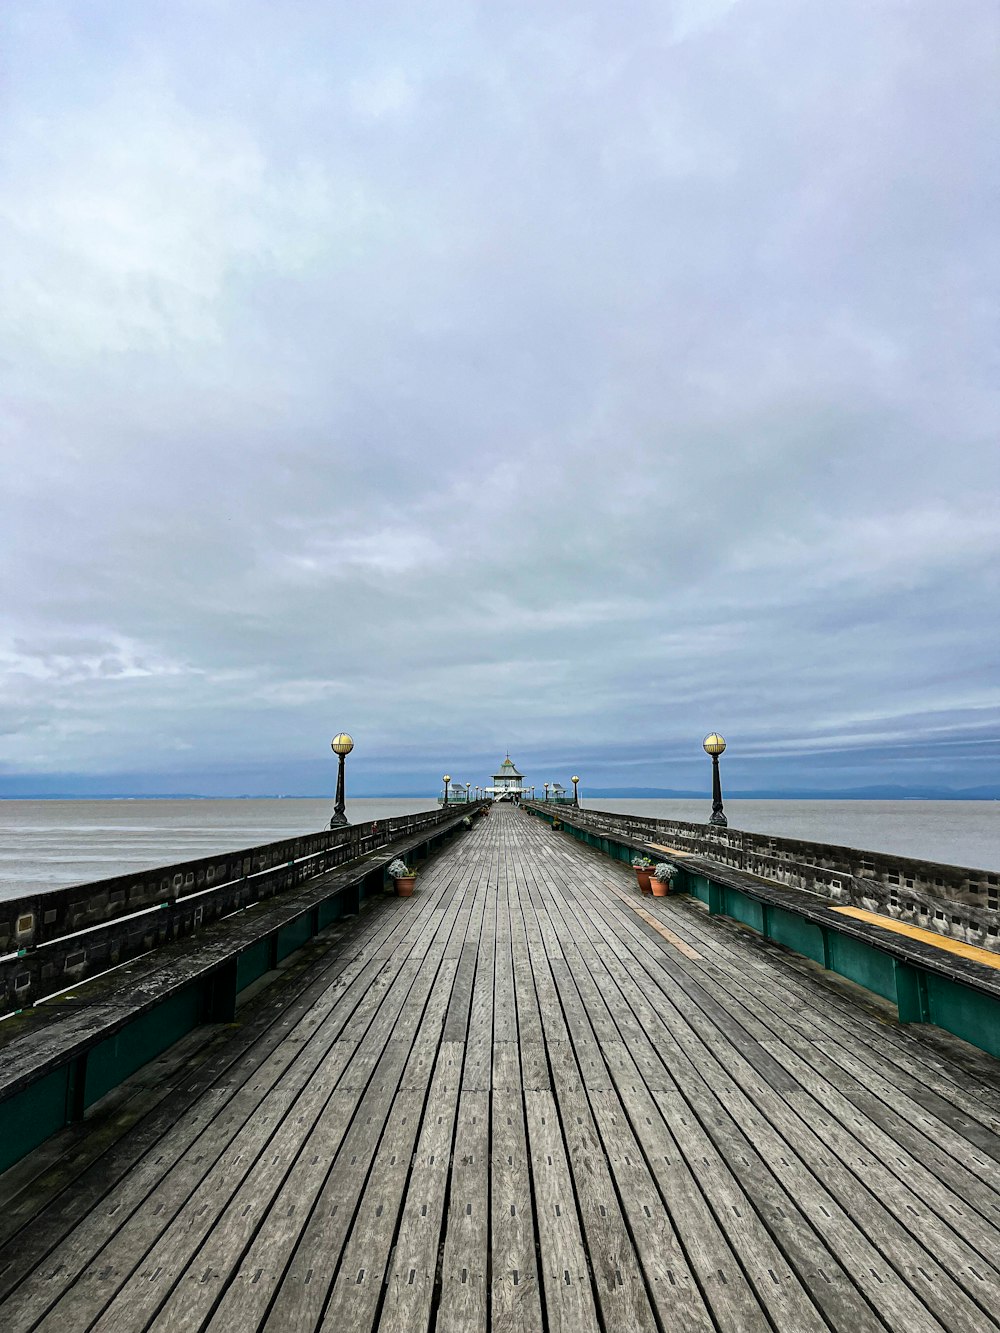 a long wooden pier with a light pole on top of it